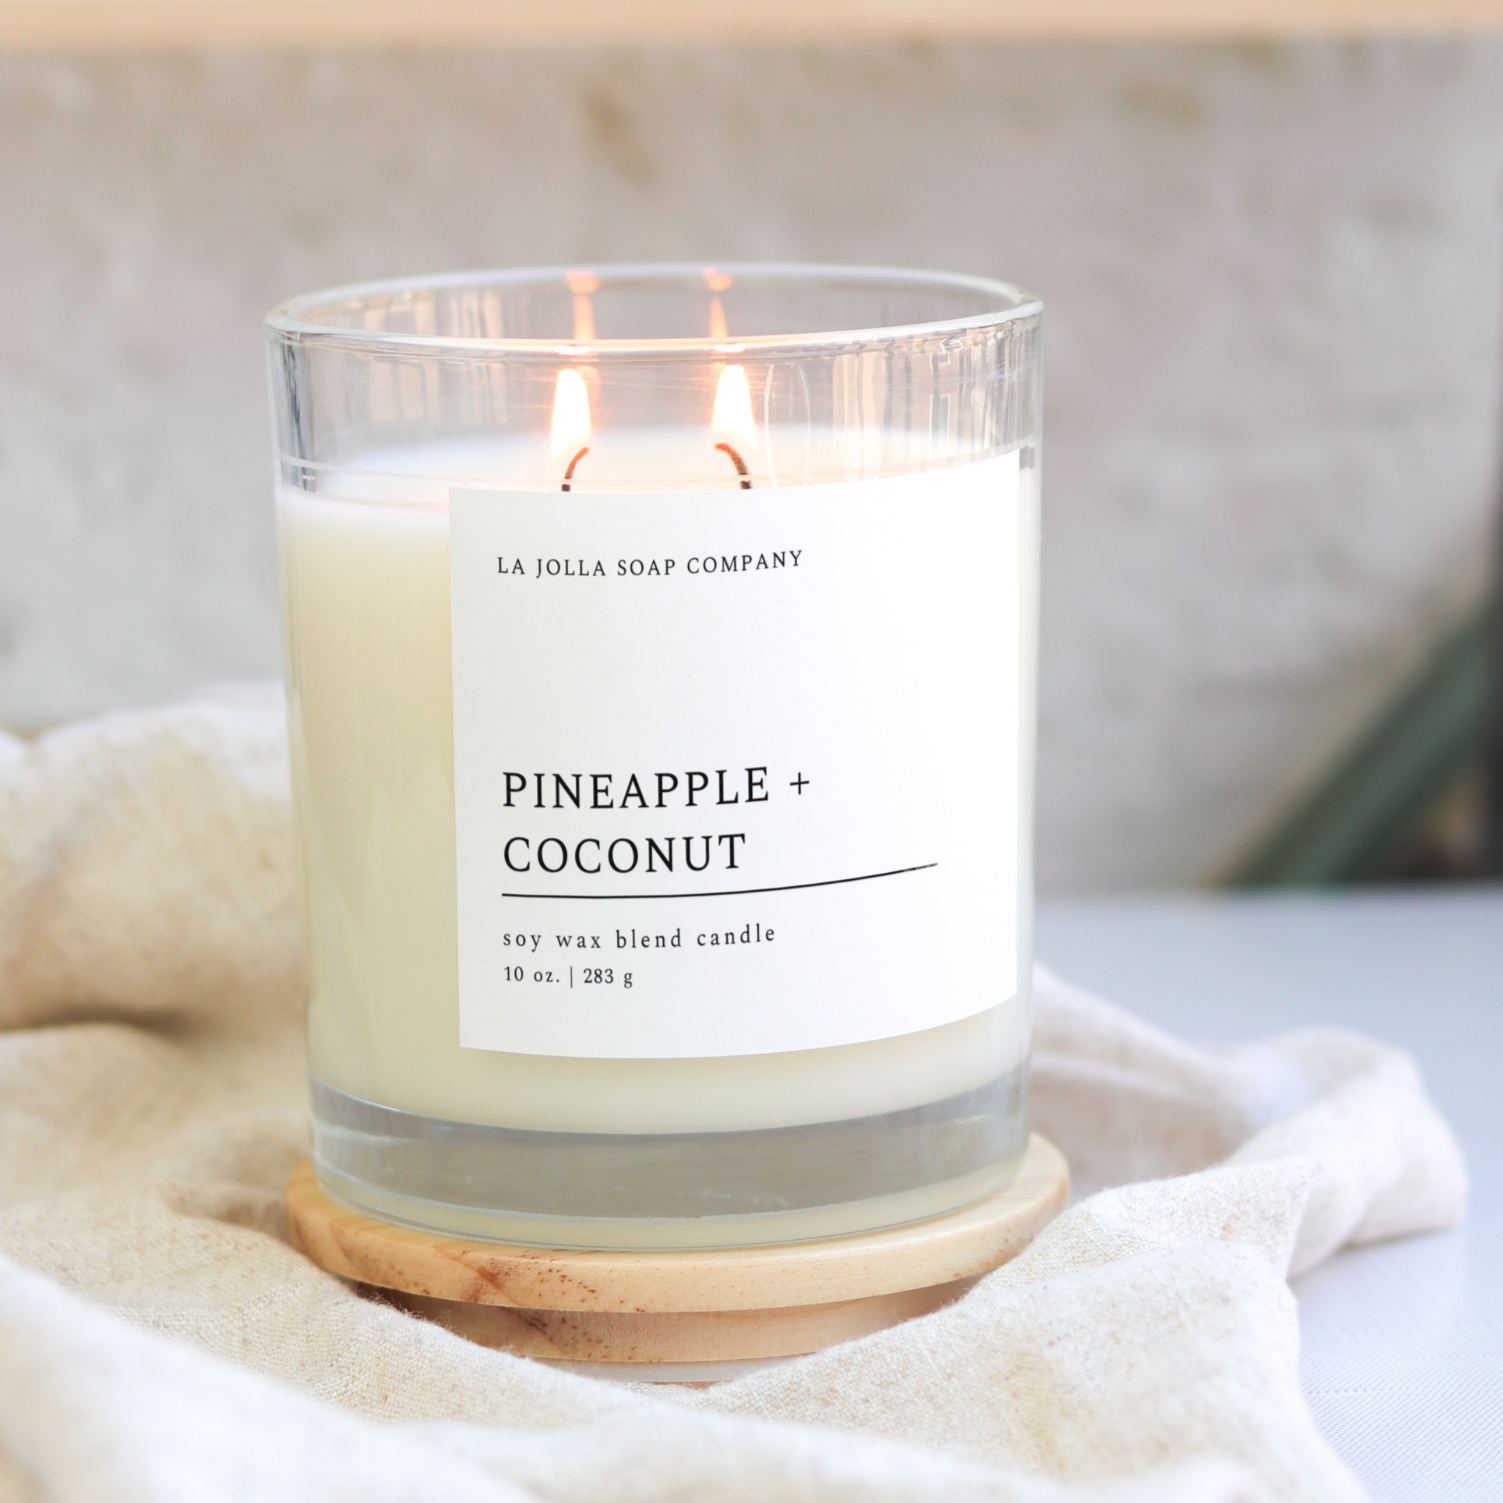 Pineapple + Coconut 10 oz candle in a glass jar with  wood lid. Pineapple and coconut, blended together in perfect harmony. The aroma conjures images of swaying palm trees and sun-drenched shores, offering a serene Tropical Paradise in your own home.